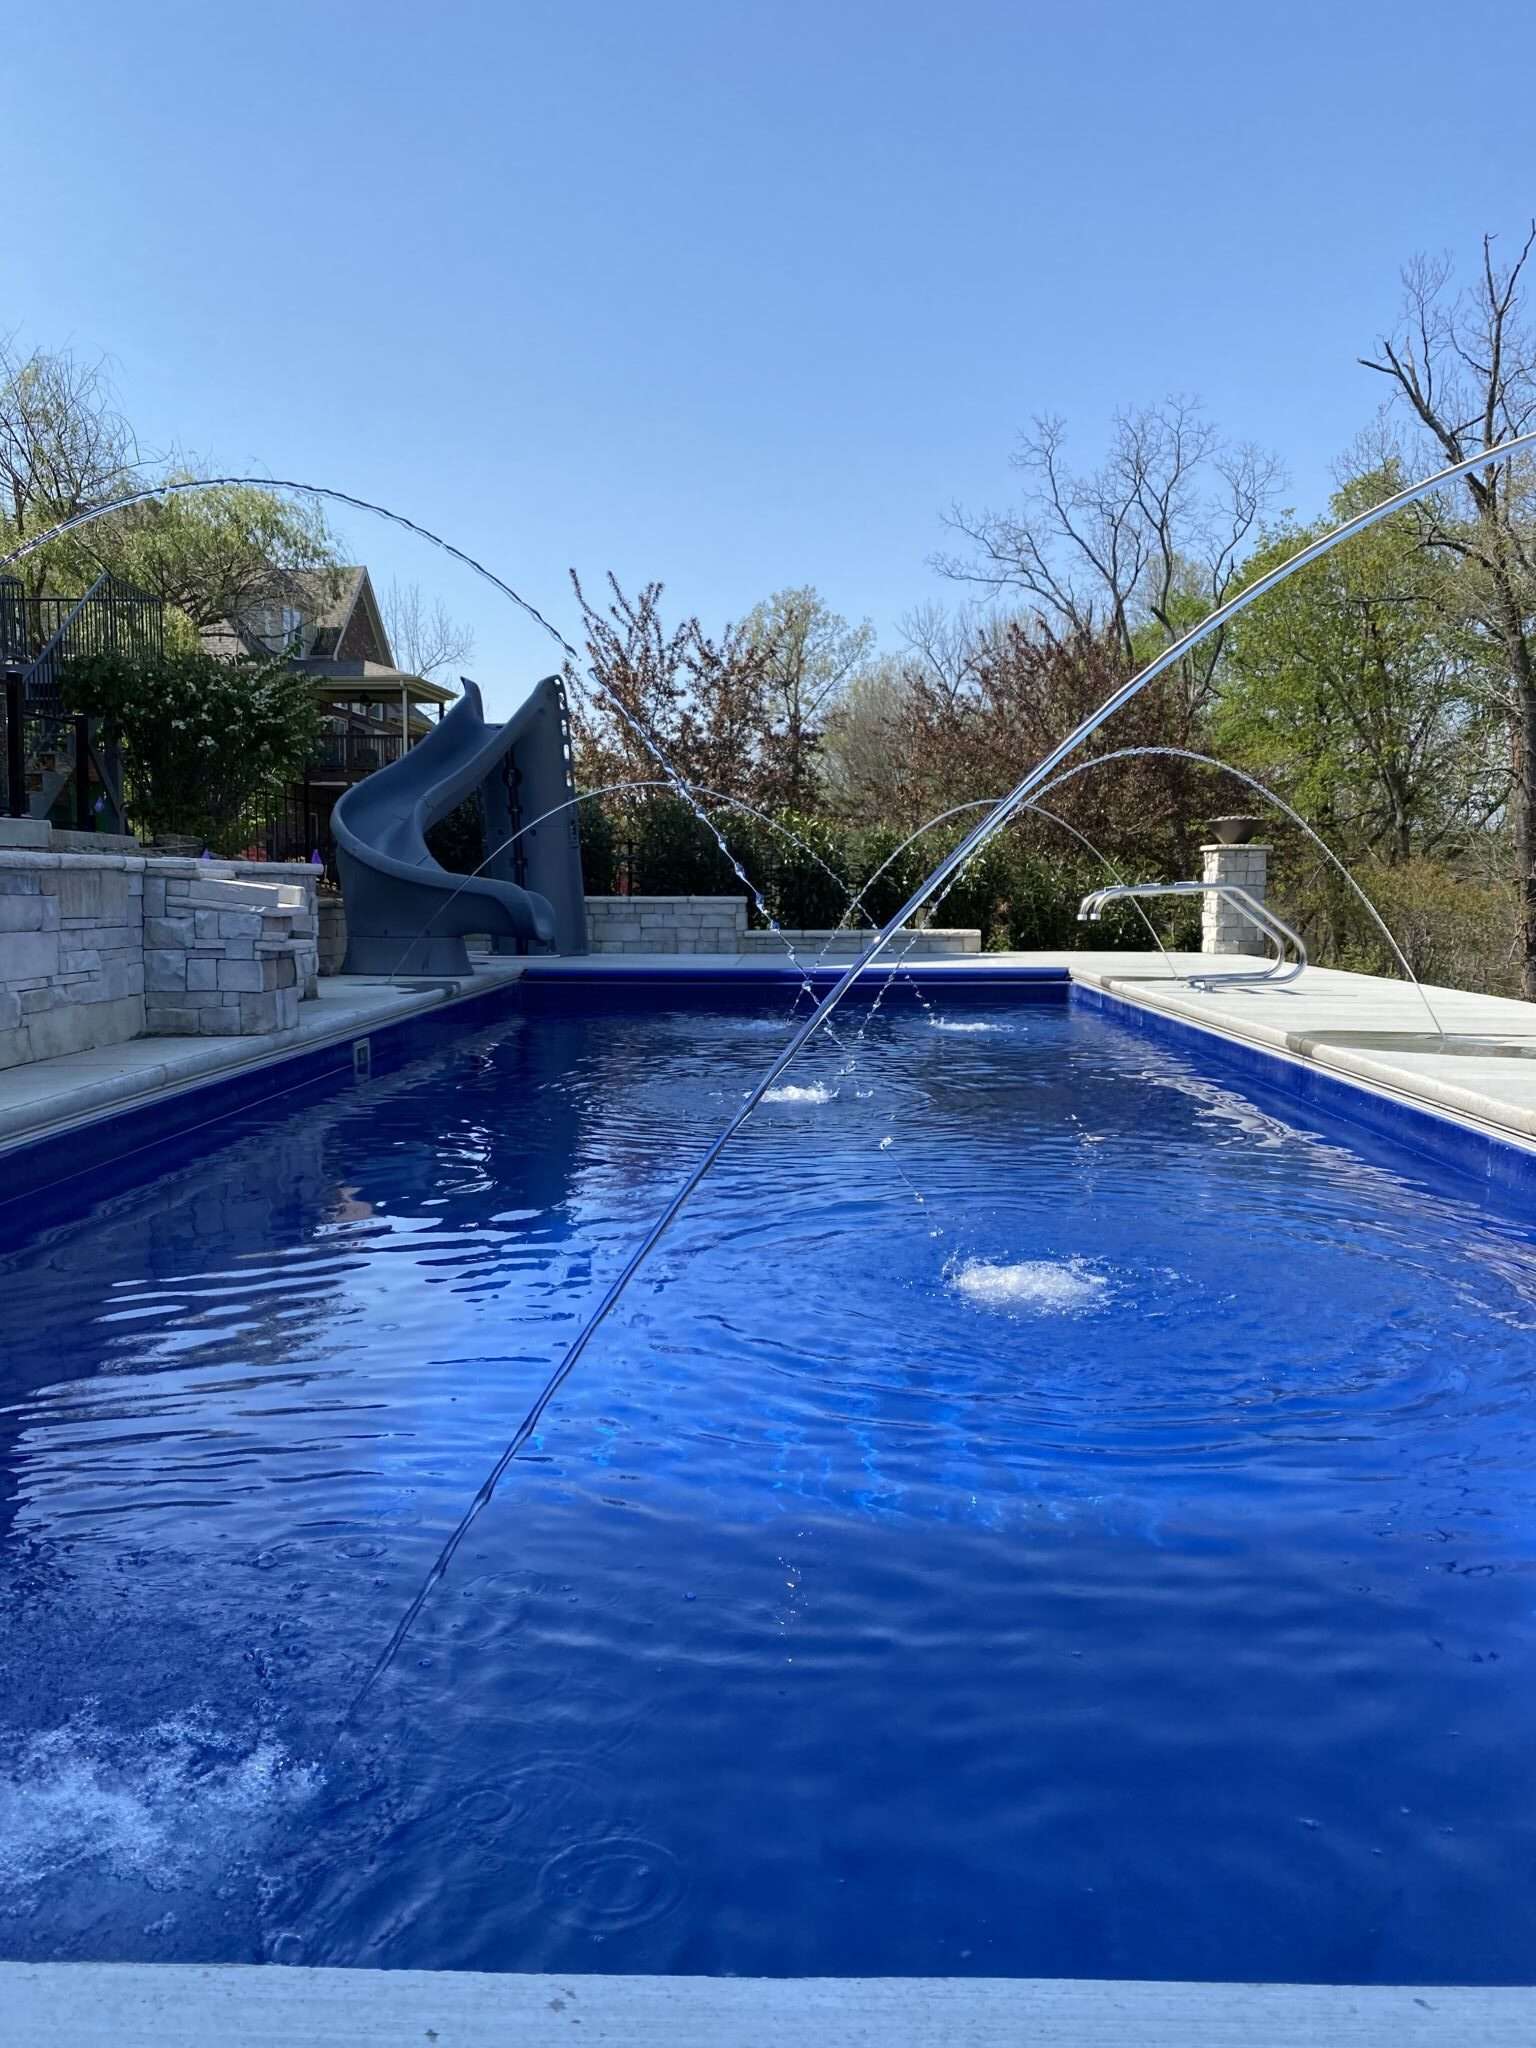 HOW MUCH IT COST TO INSTALL A FIBERGLASS POOL